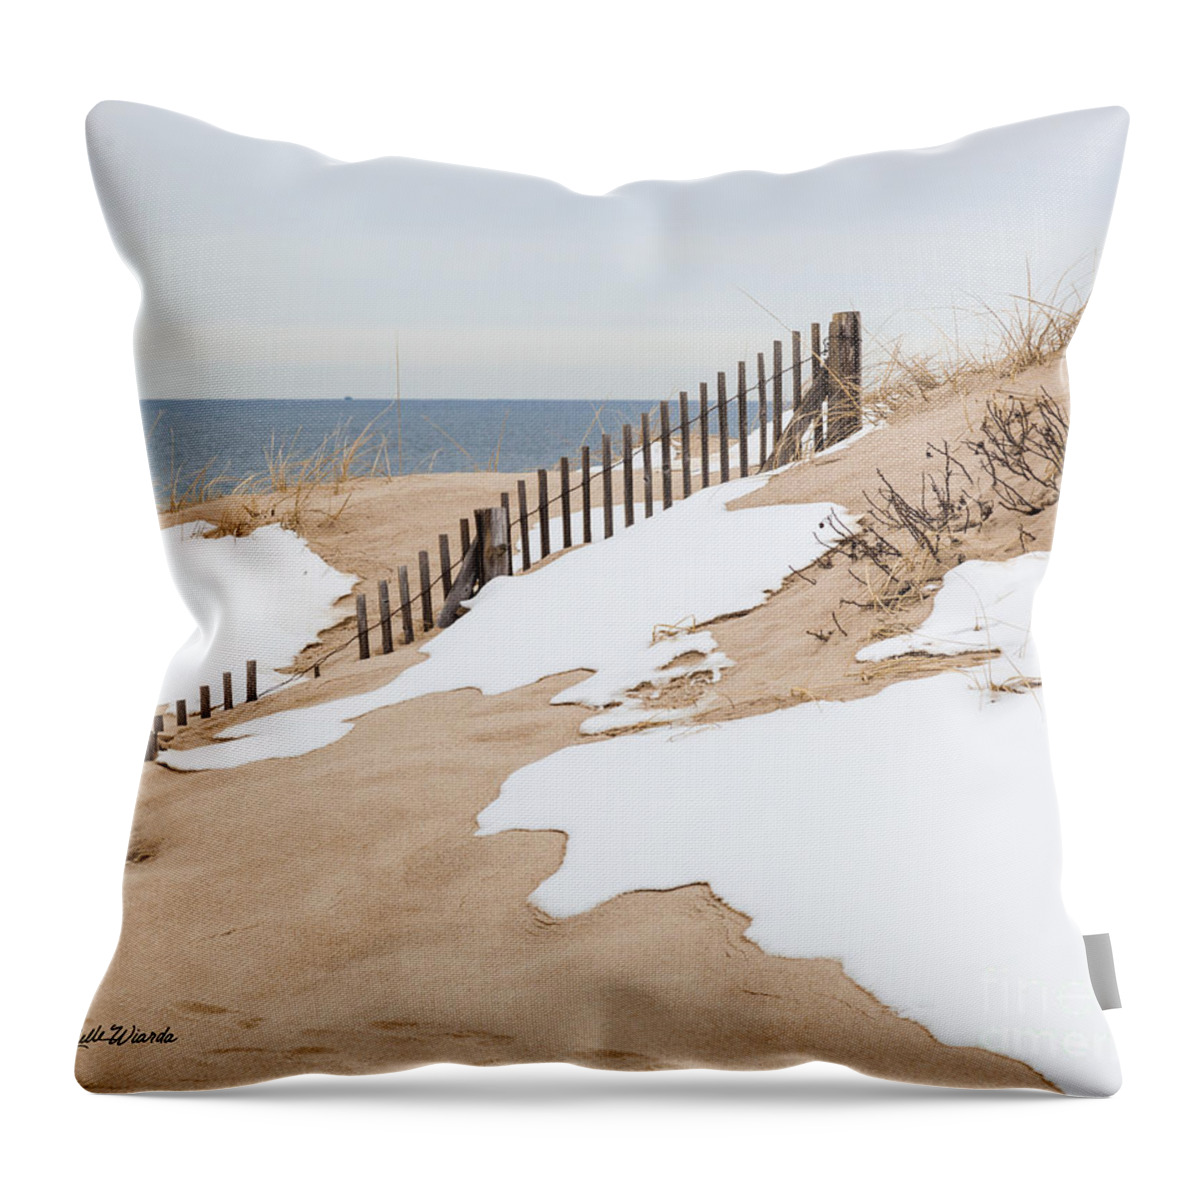 Brutal Beauty Throw Pillow featuring the photograph Brutal Beauty by Michelle Constantine